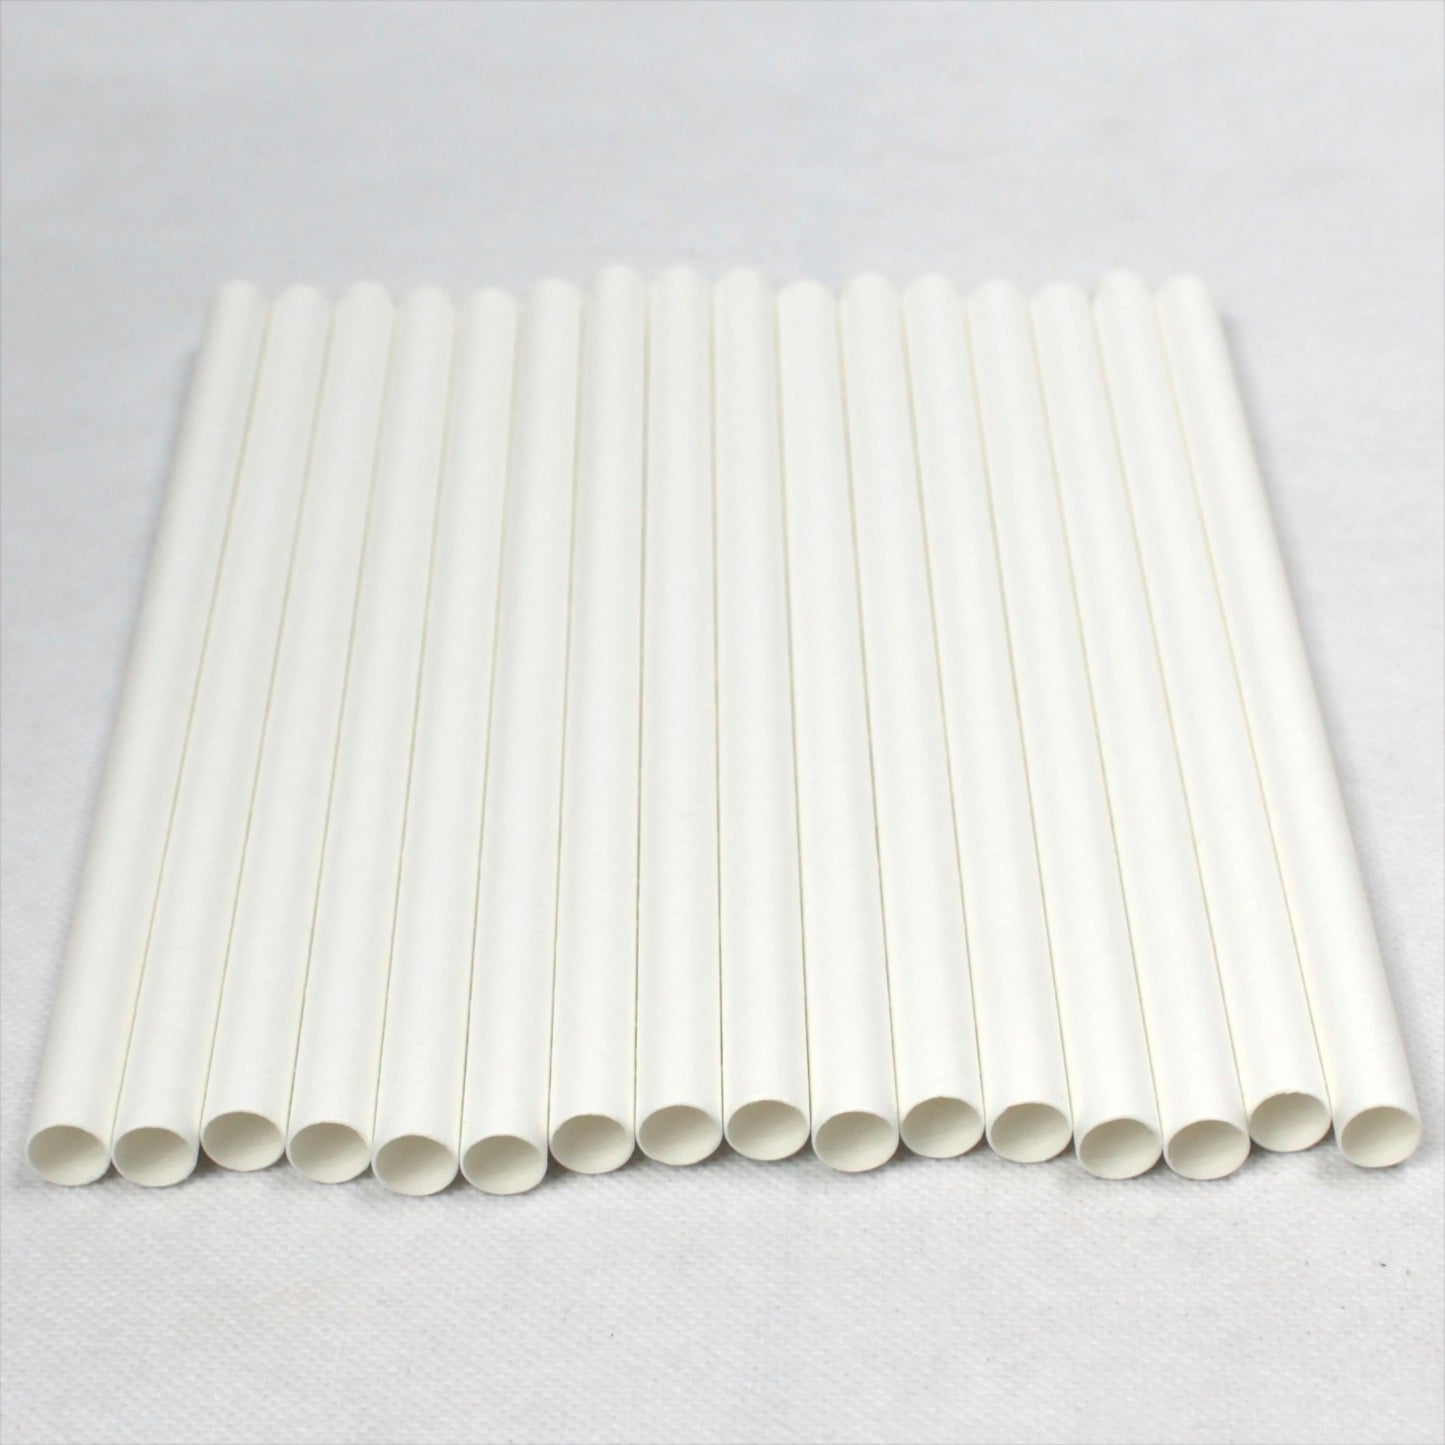 Individually Wrapped White Paper Straws (10mm x 200mm)